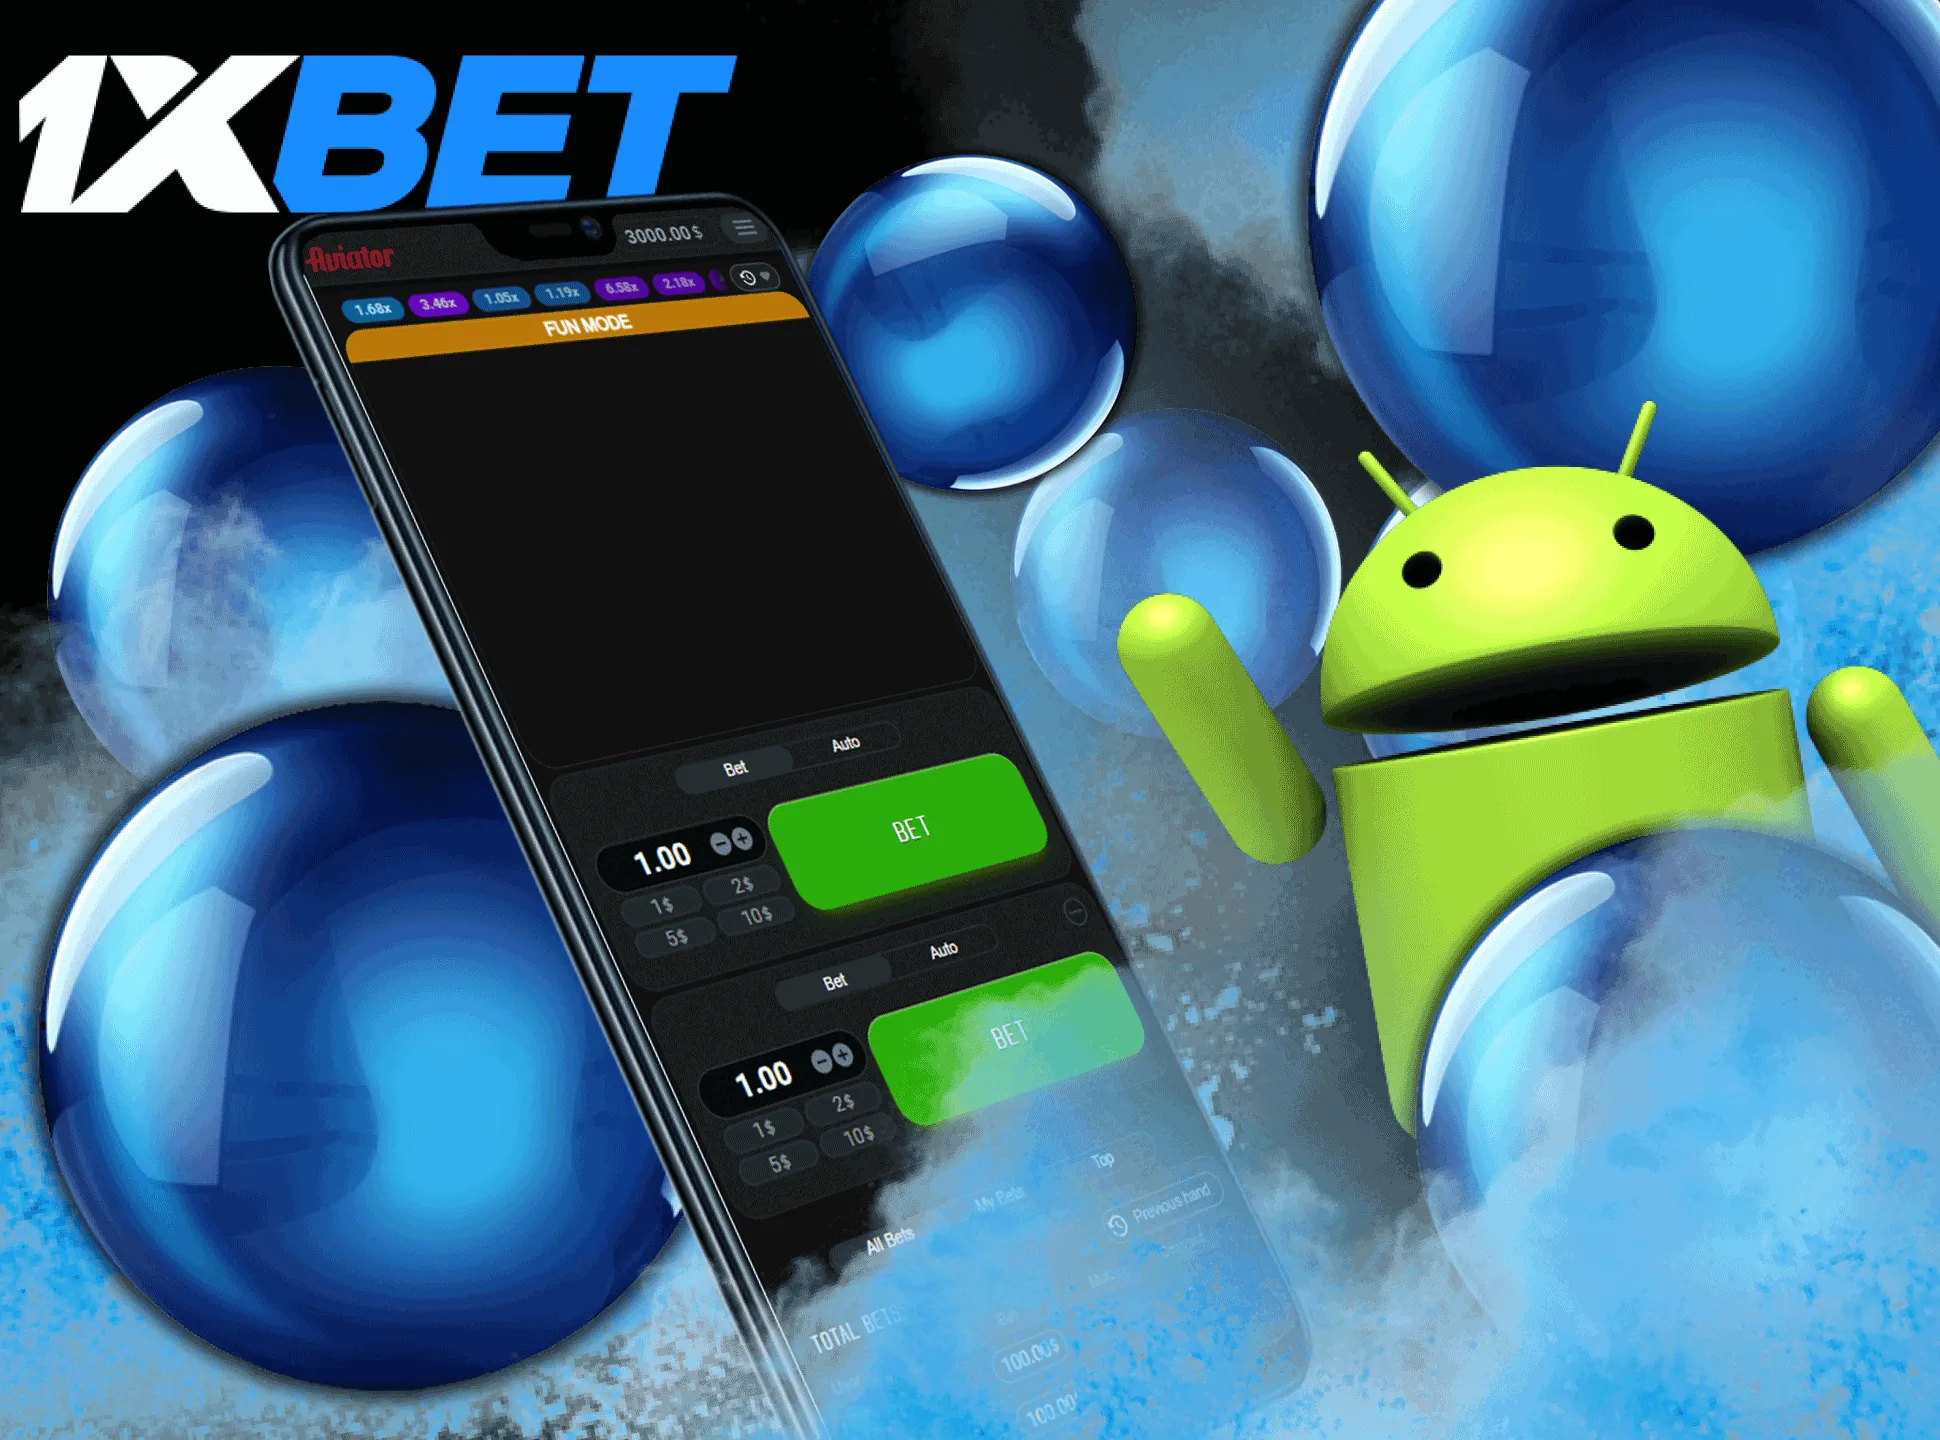 Download the 1xbet app on your Android devices and play Aviator.